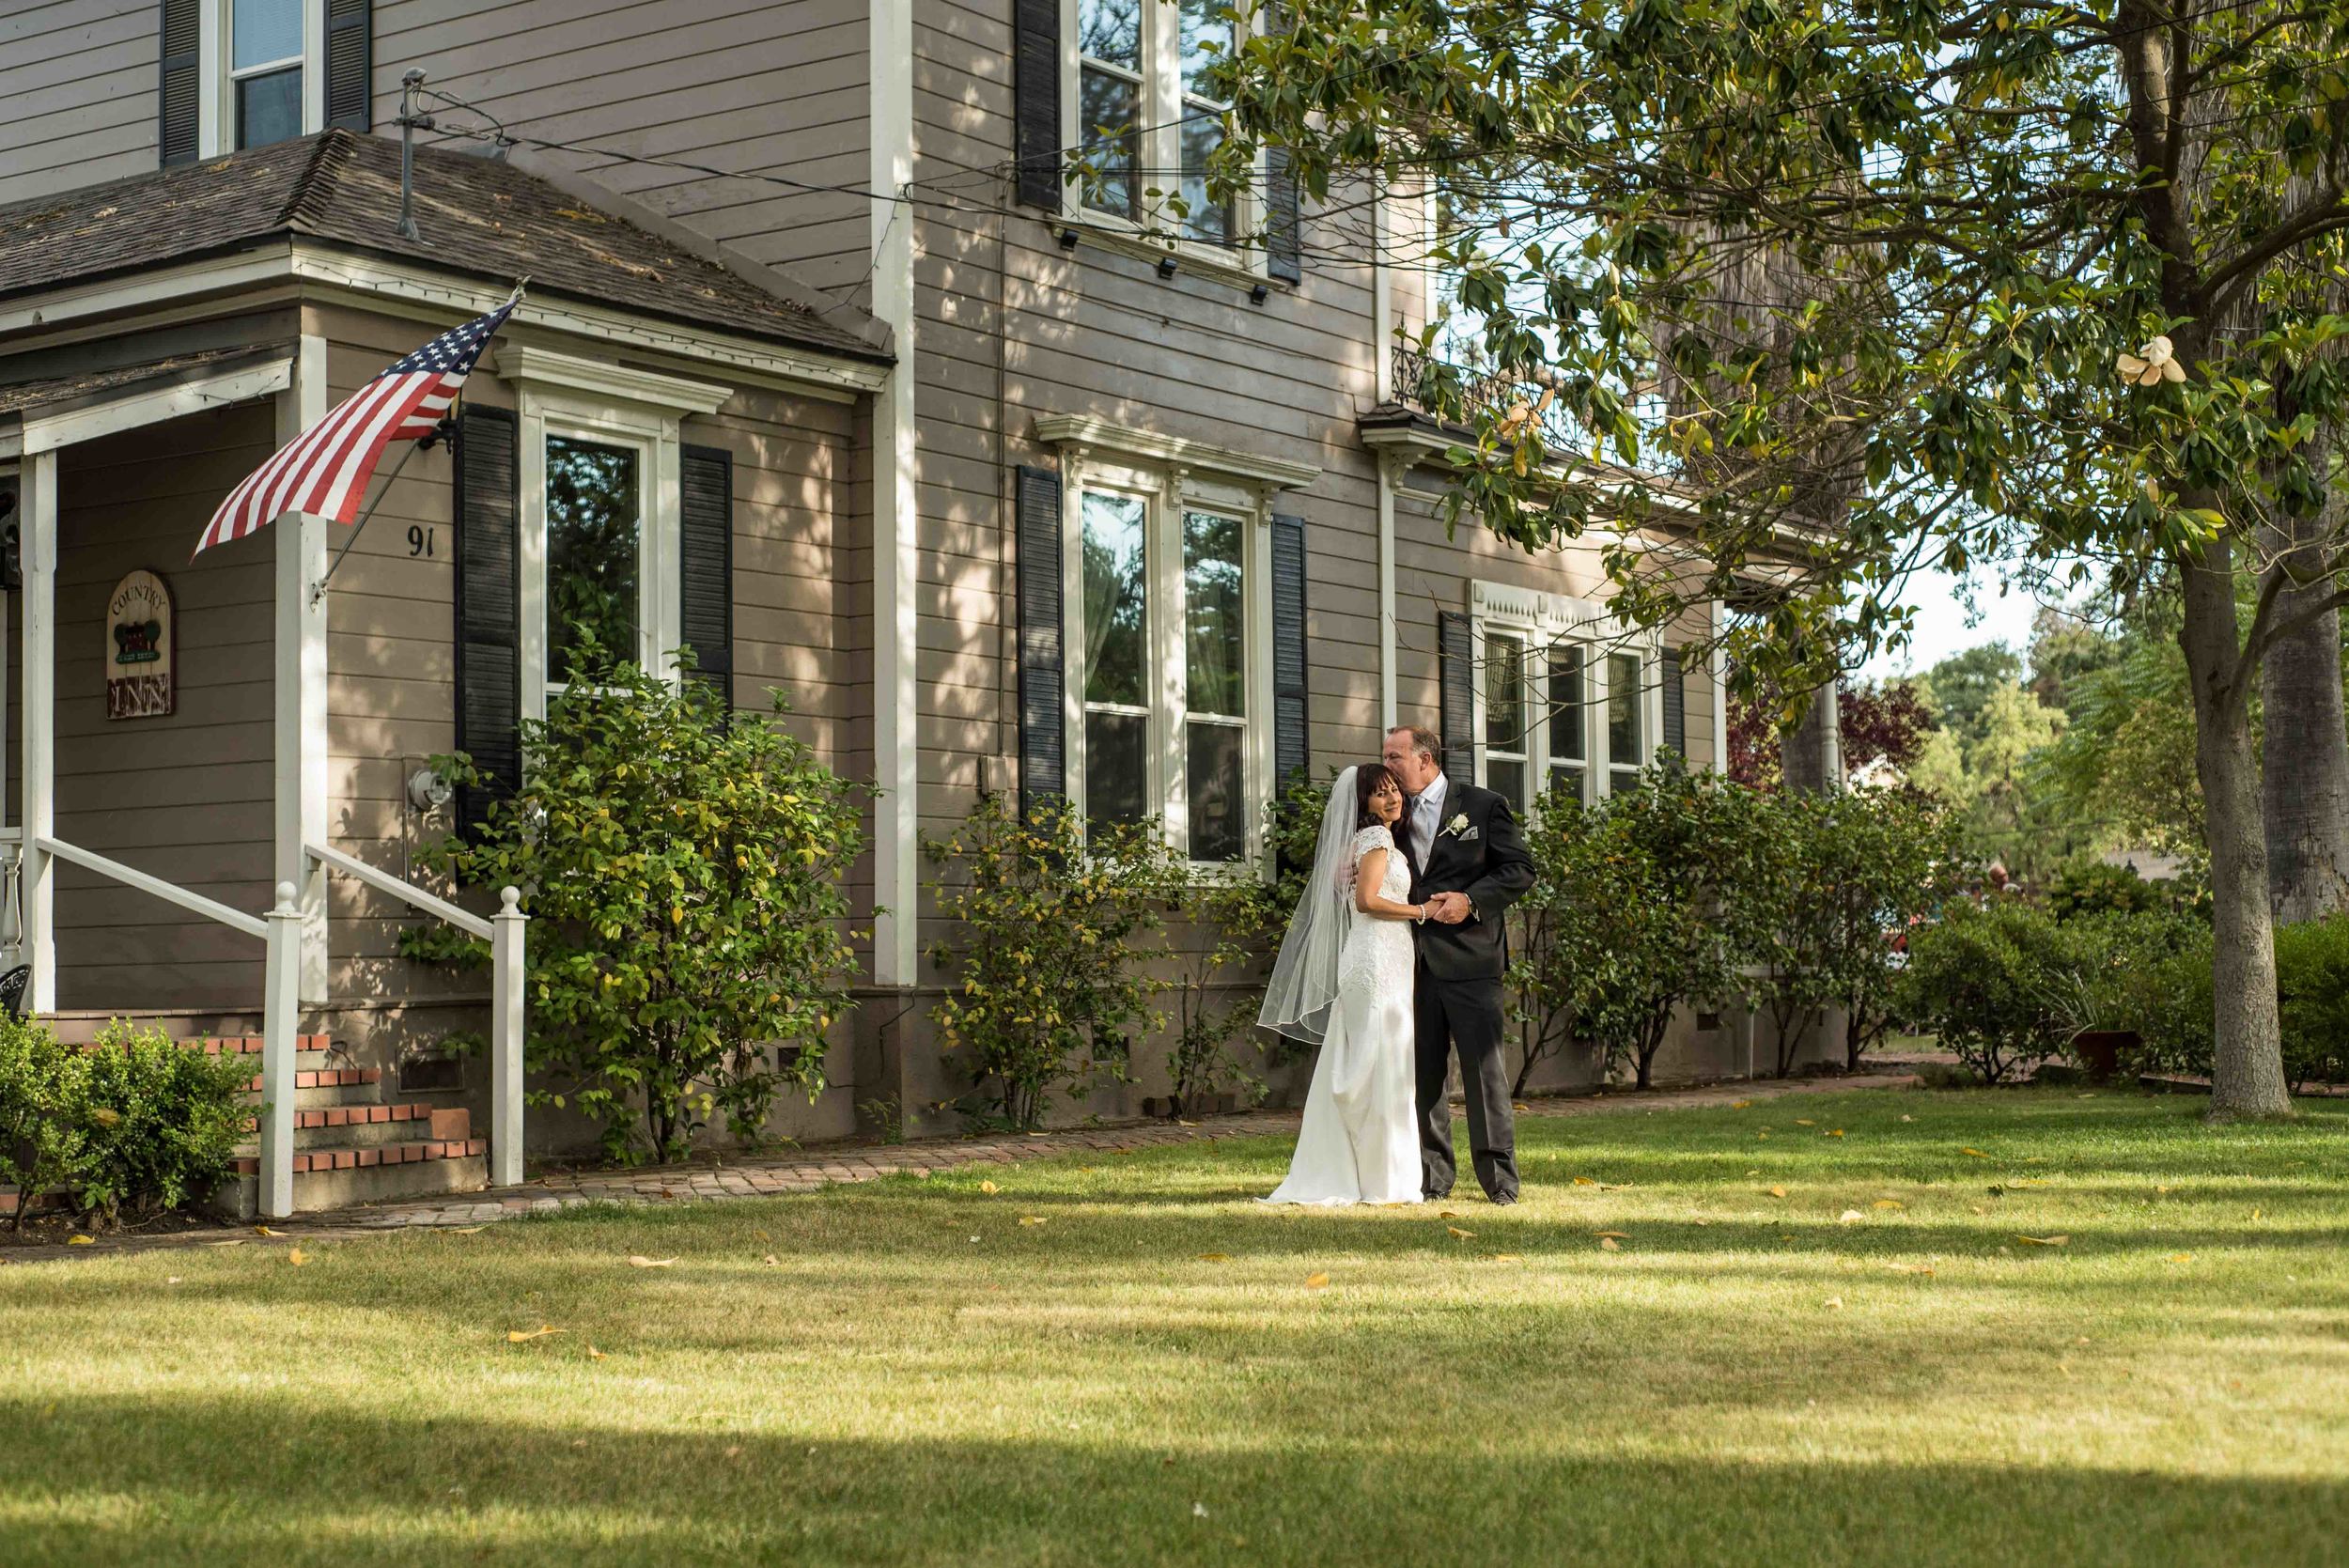 Country Home Inn Bed and Breakfast Wedding